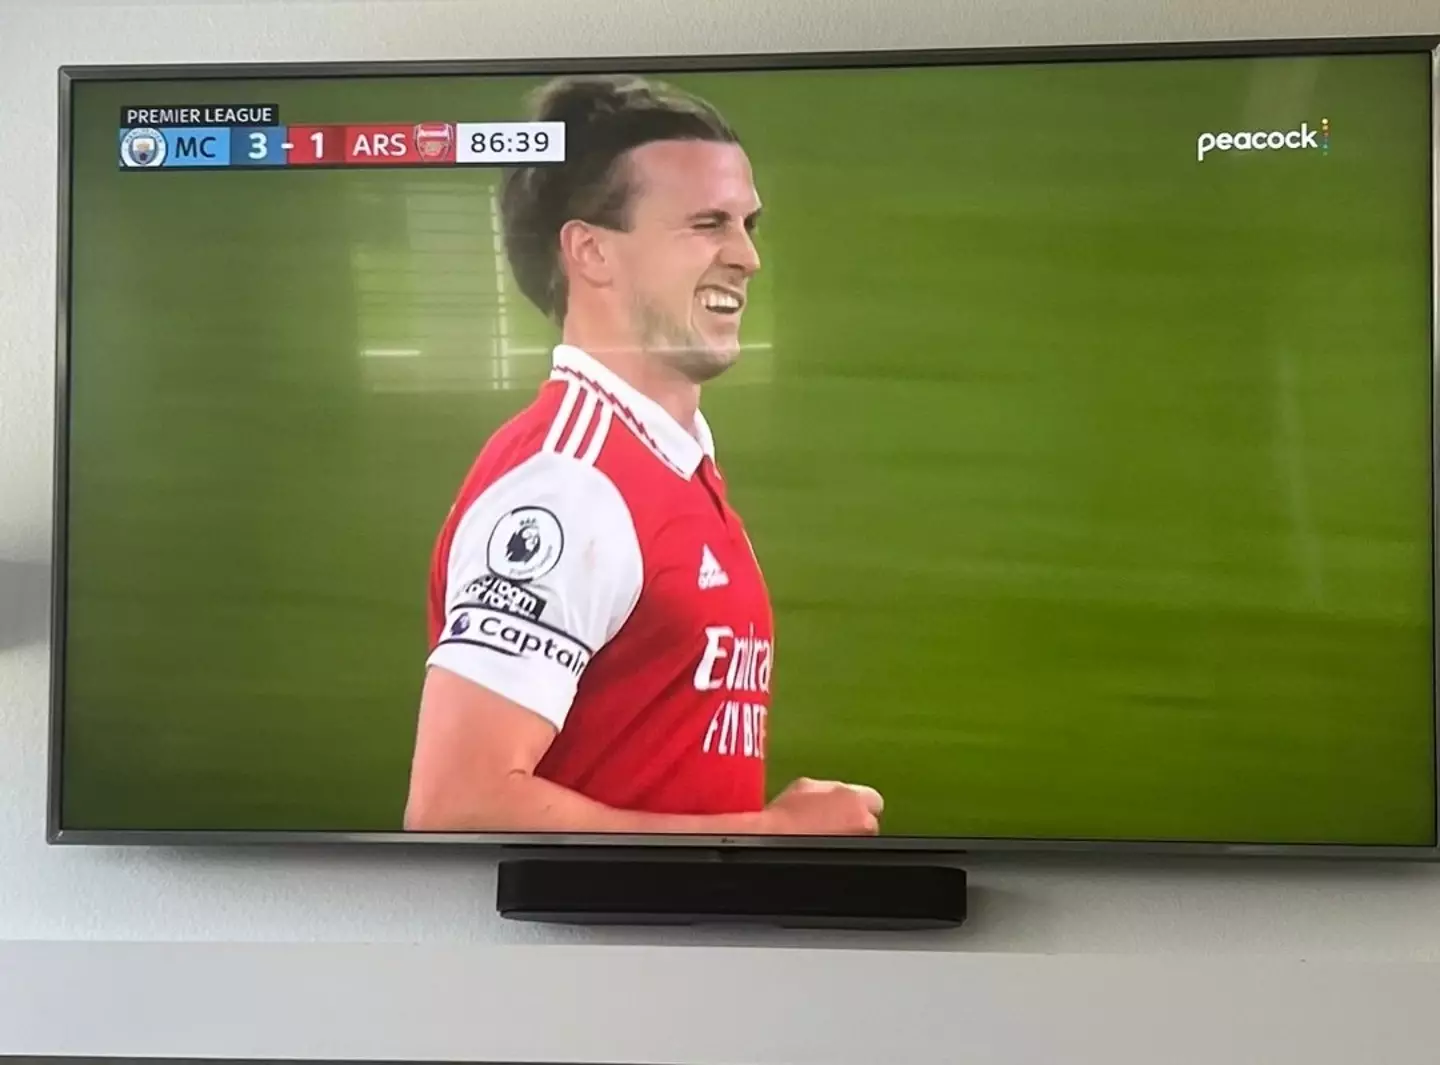 Rob Holding winked after scoring against Manchester City. Image: via Twitter/Premier League 